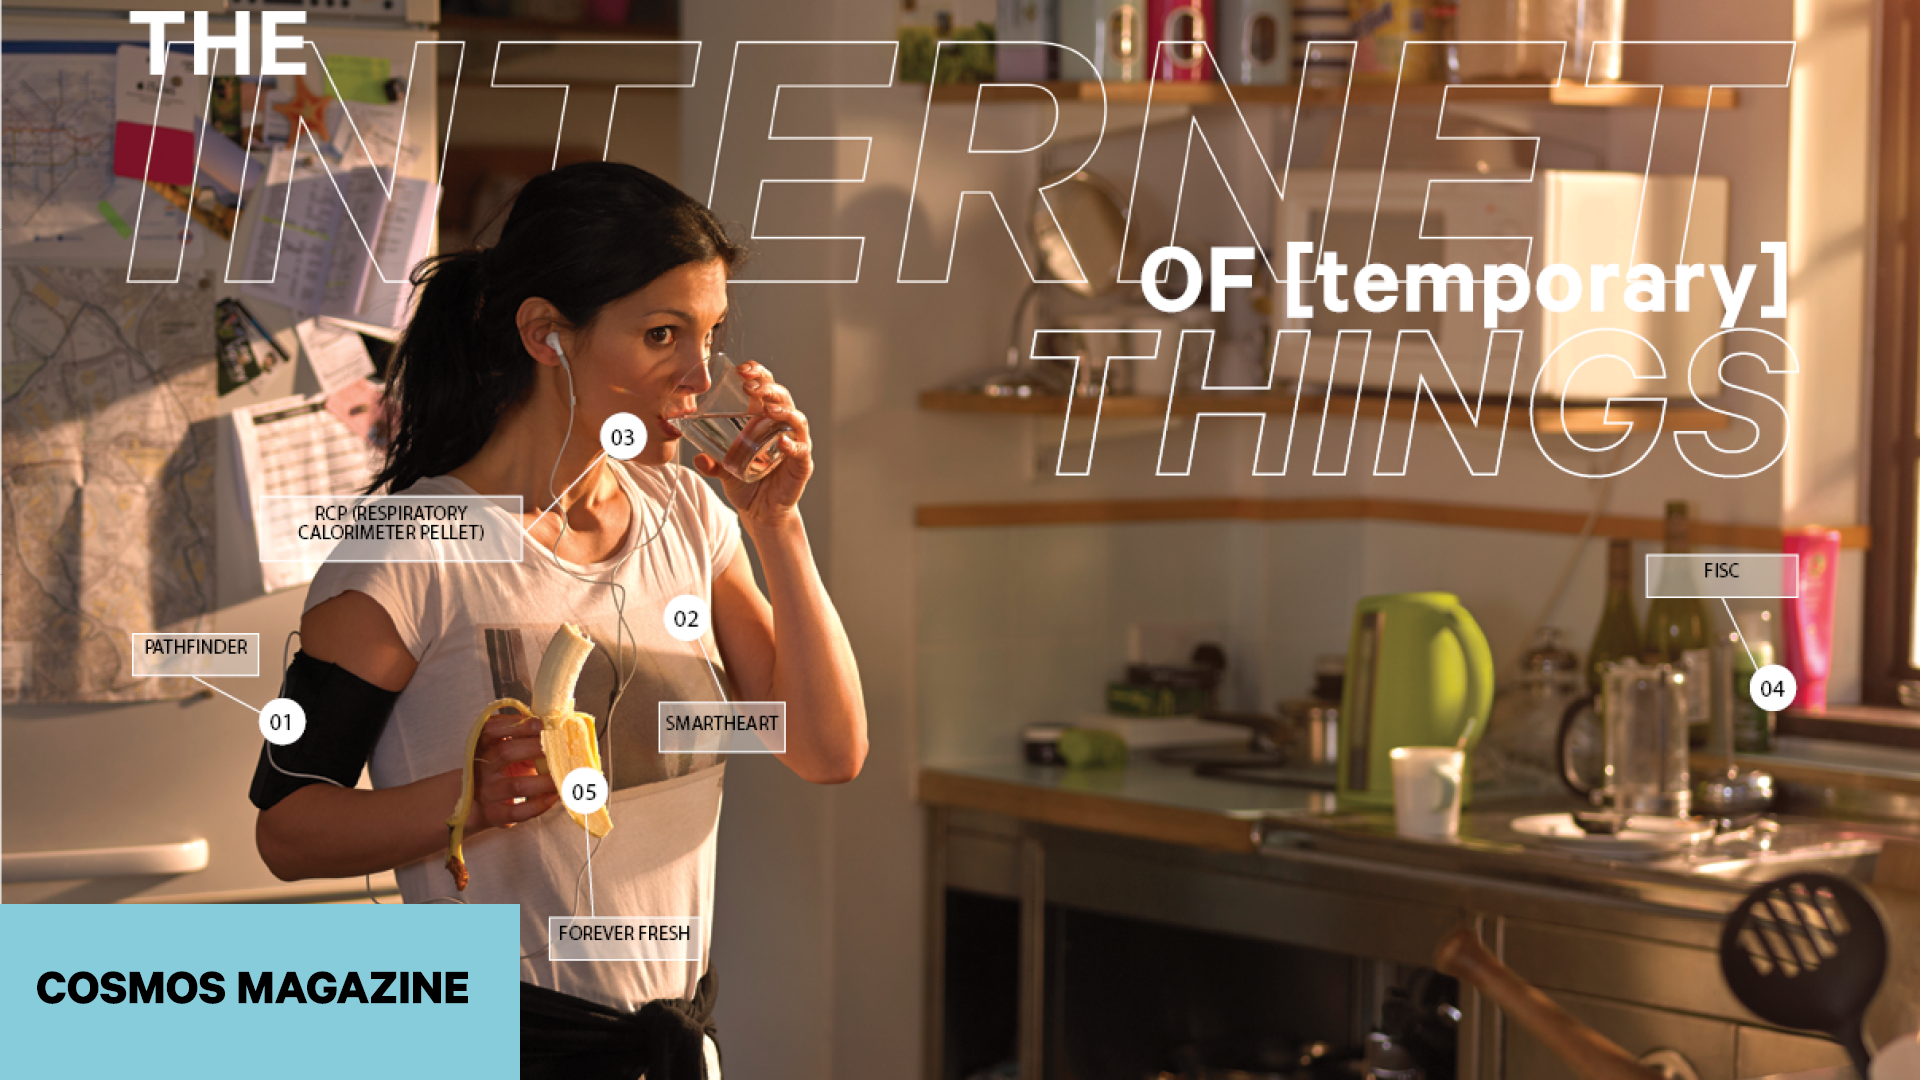 COSMOS Magazine: The Internet of Temporary Things